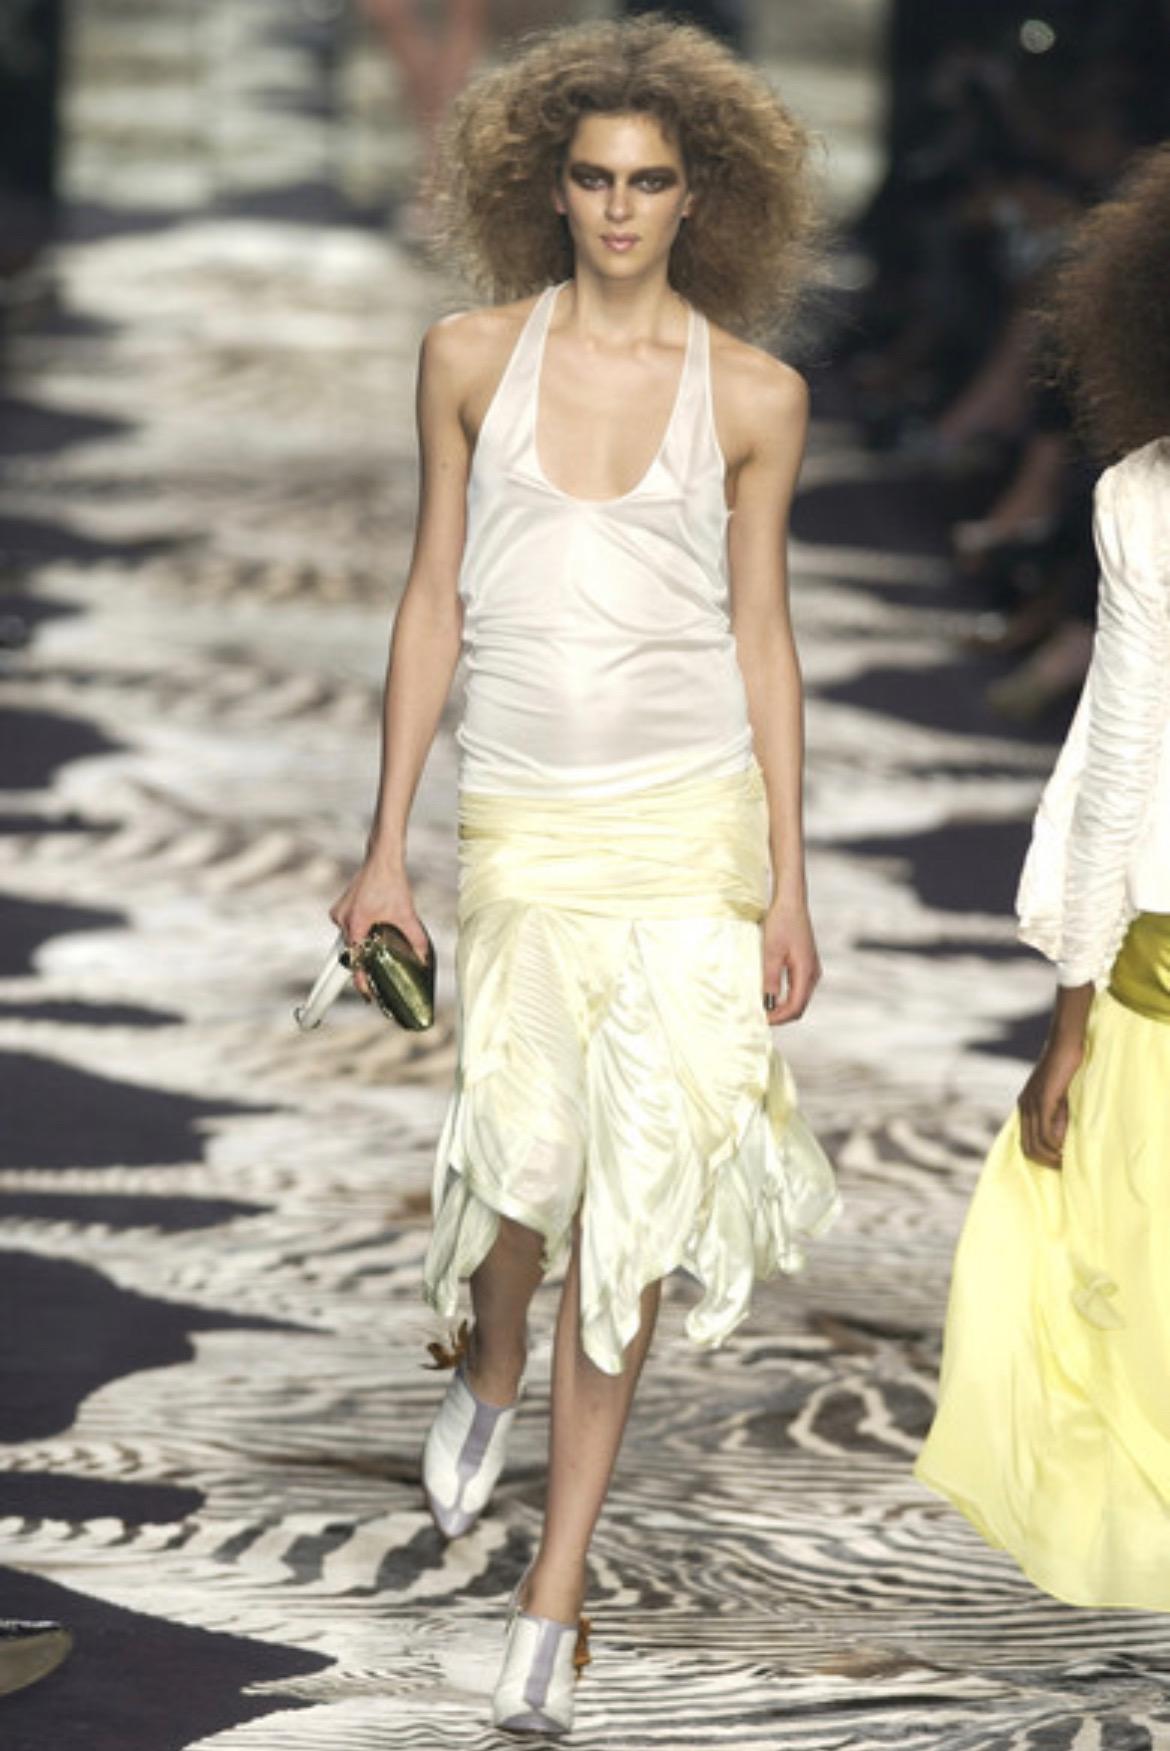 Presenting an off-white stretch viscose Yves Saint Laurent Rive Gauche ruffle skirt, designed by Tom Ford. From the Spring/Summer 2004 collection, this skirt debuted on the season's runway on look 24 modeled by Elise Crombez. Featuring a fabulous